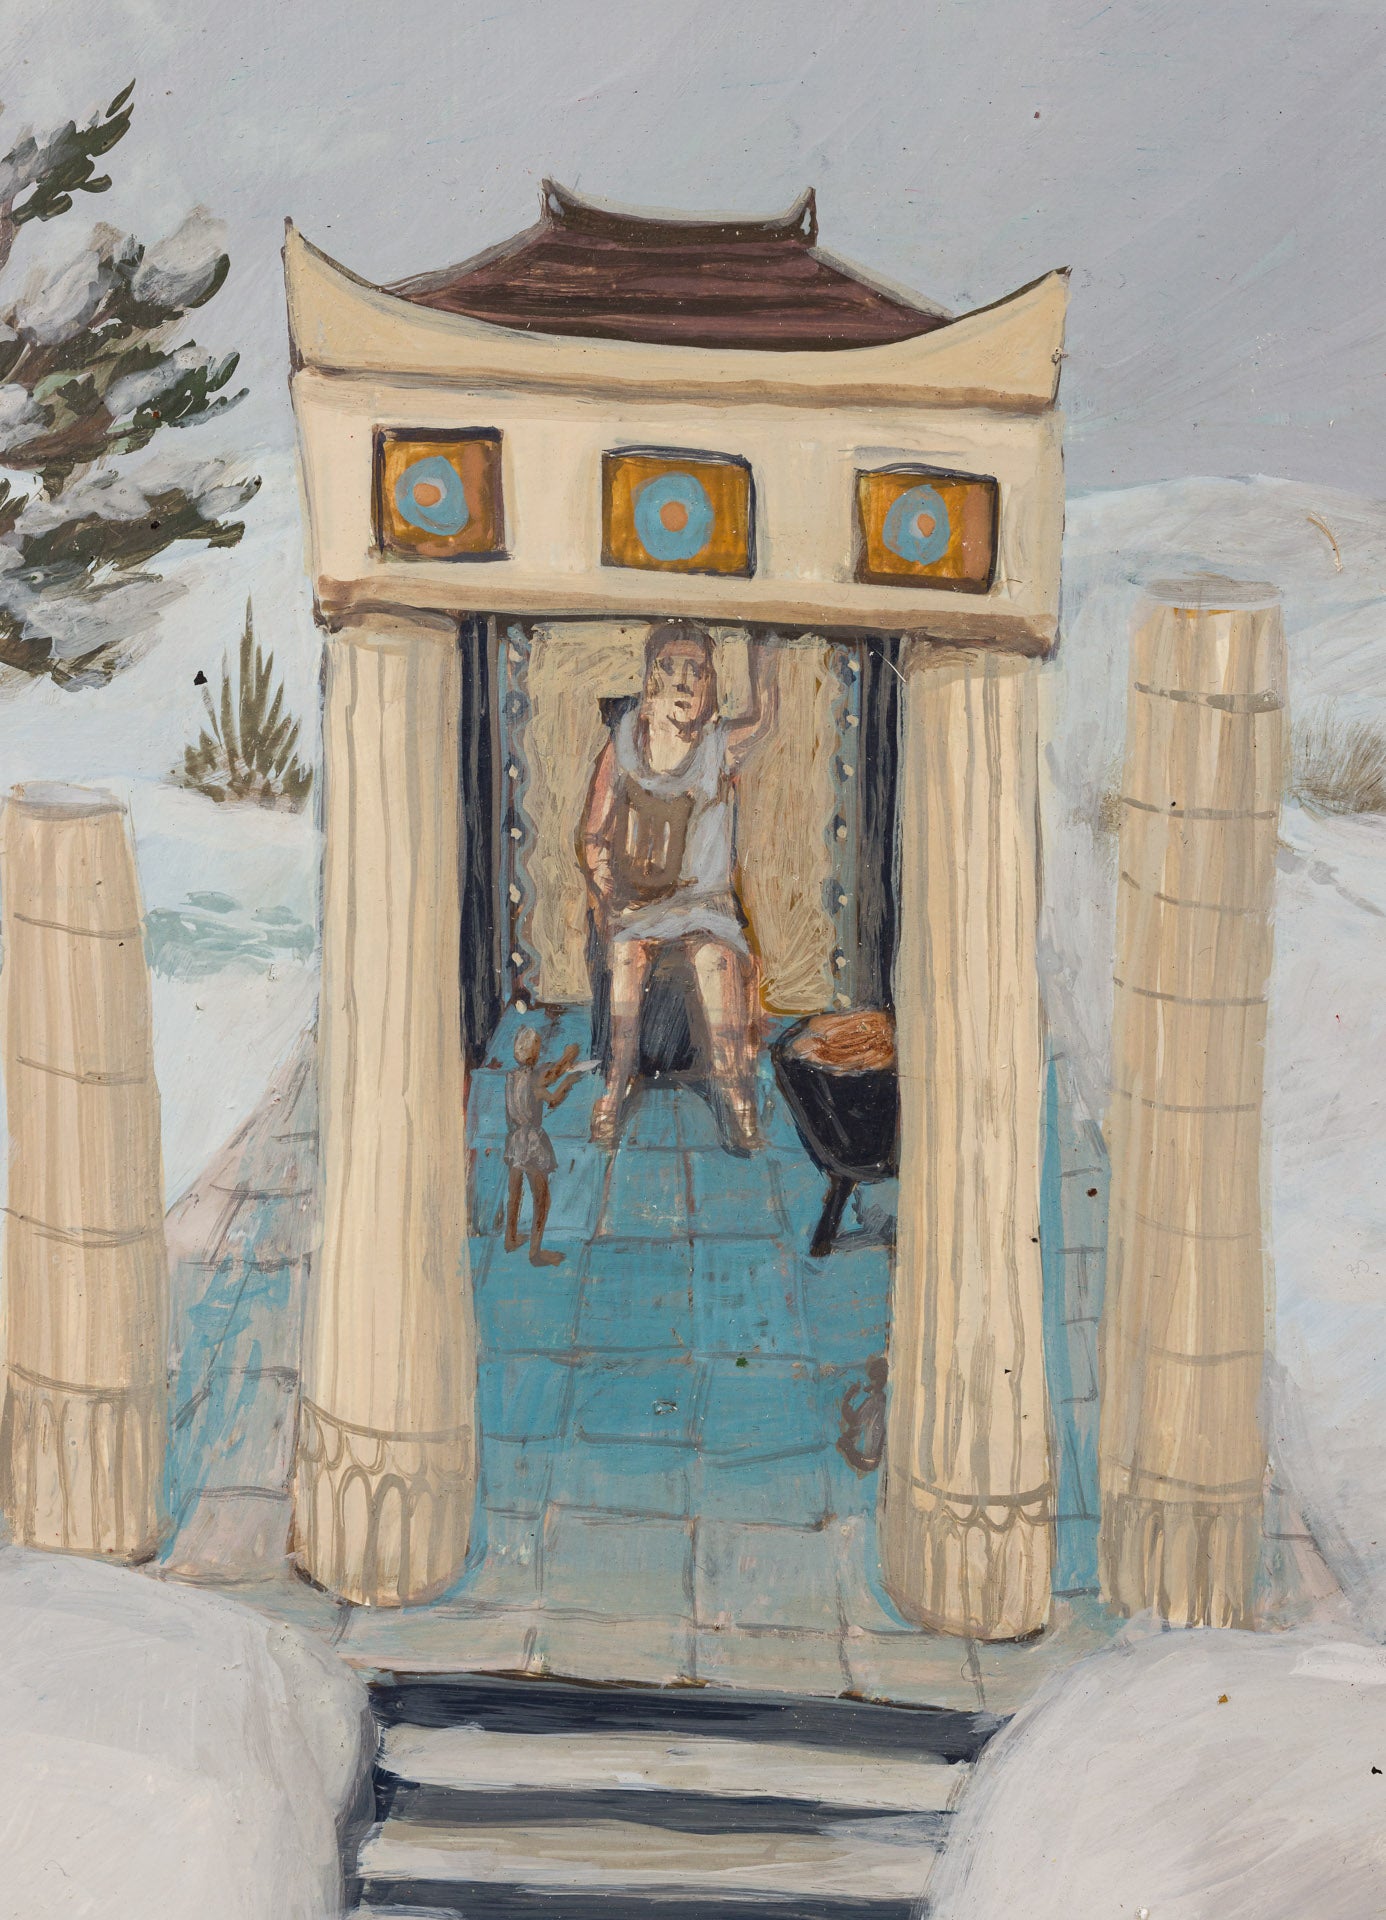 Chris Ulivo, Forces of Destiny: A Quiet Snowy Day At A Rebuilt Temple